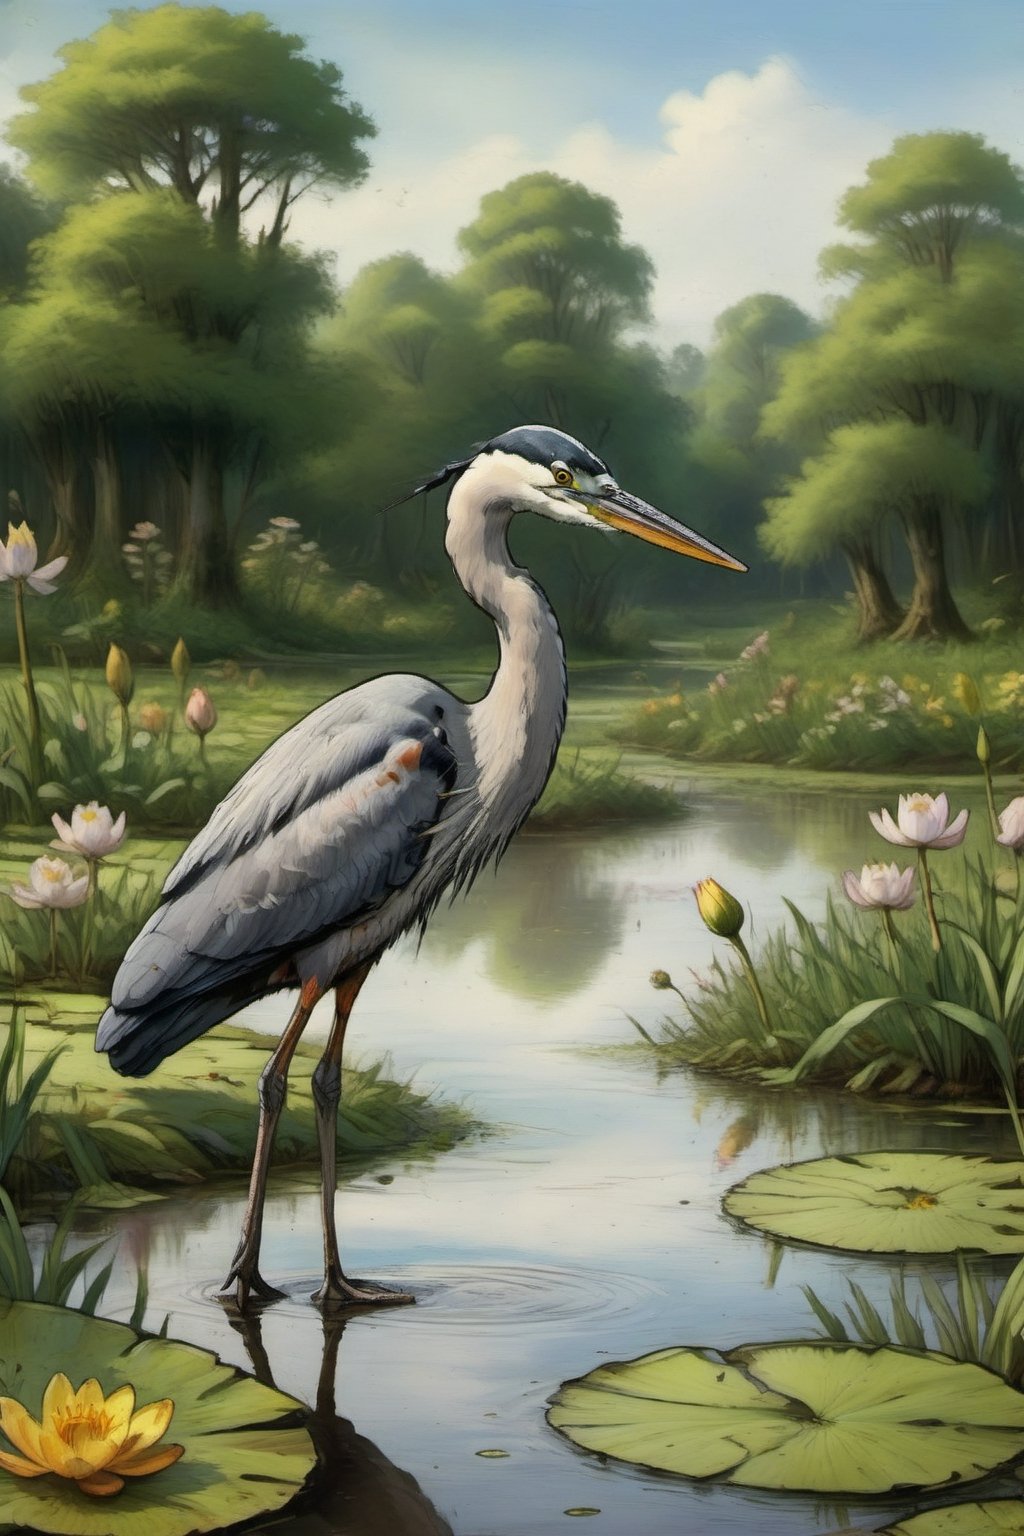 a heron in a swamp full in spring. with some flower in the background

